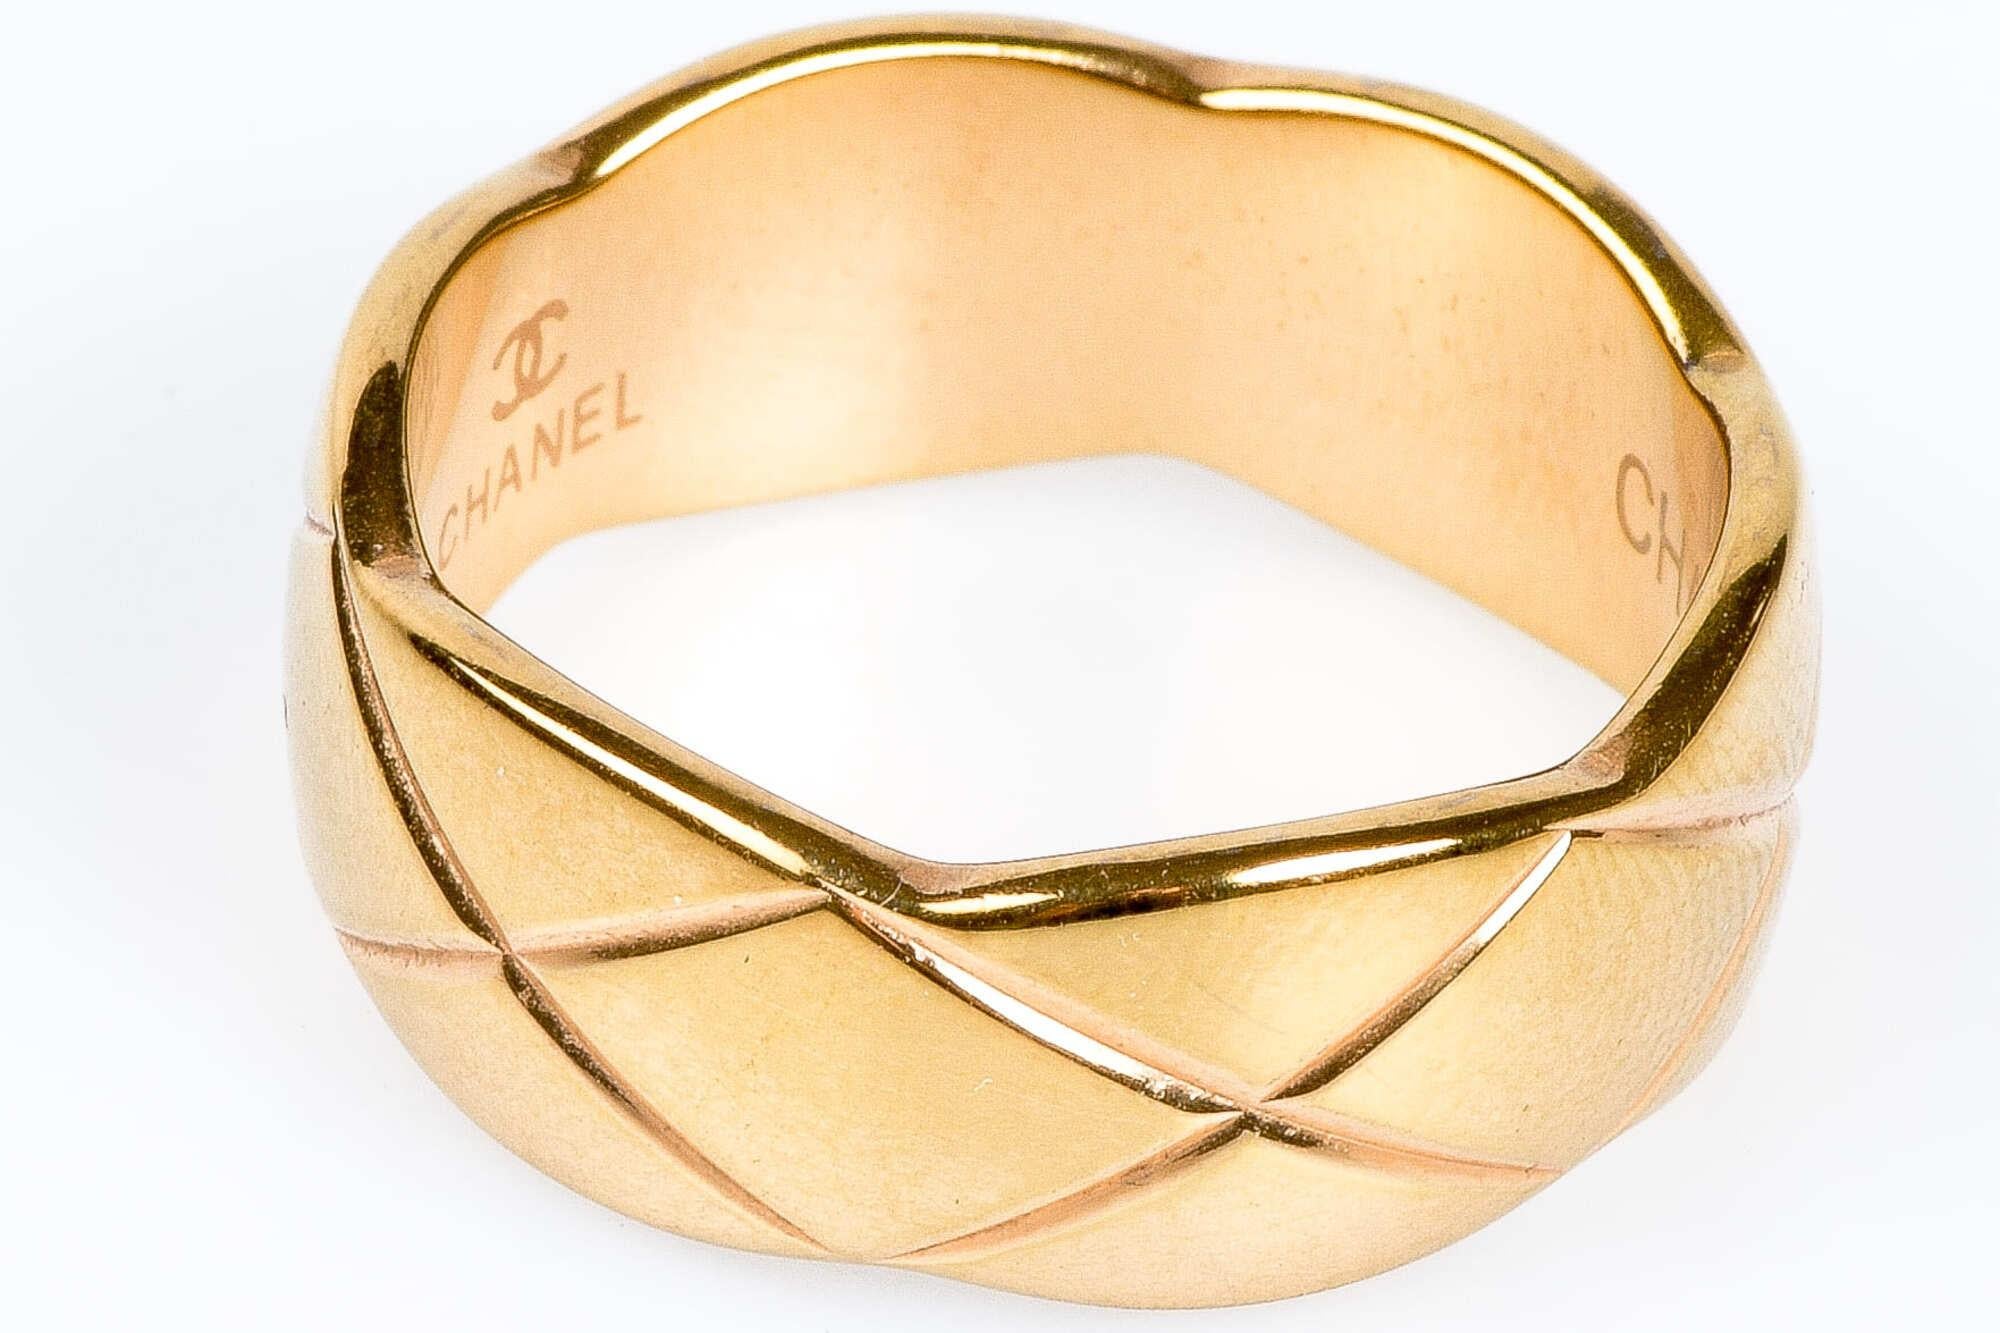 Coco Crush model ring by CHANEL in 18k yellow gold  1